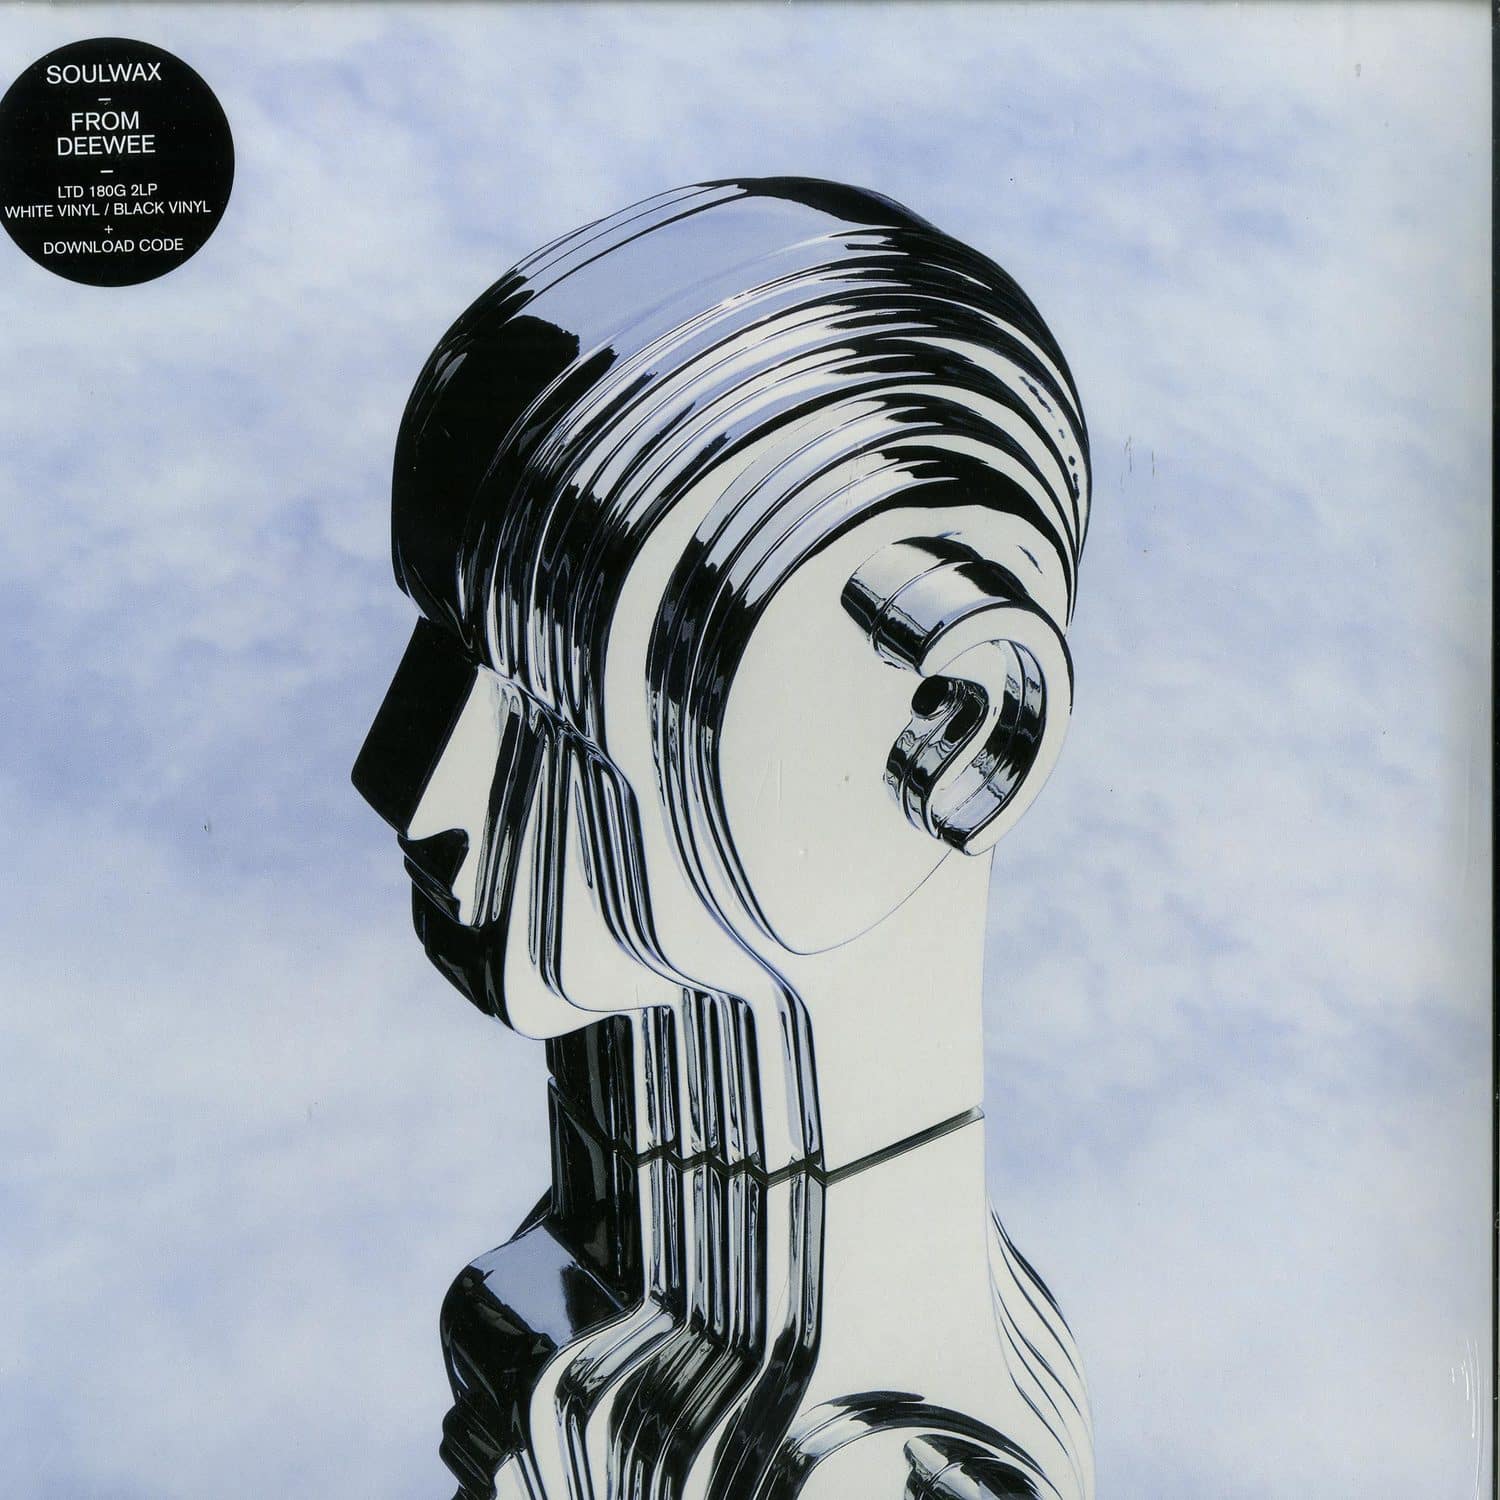 Soulwax - FROM DEEWEE 